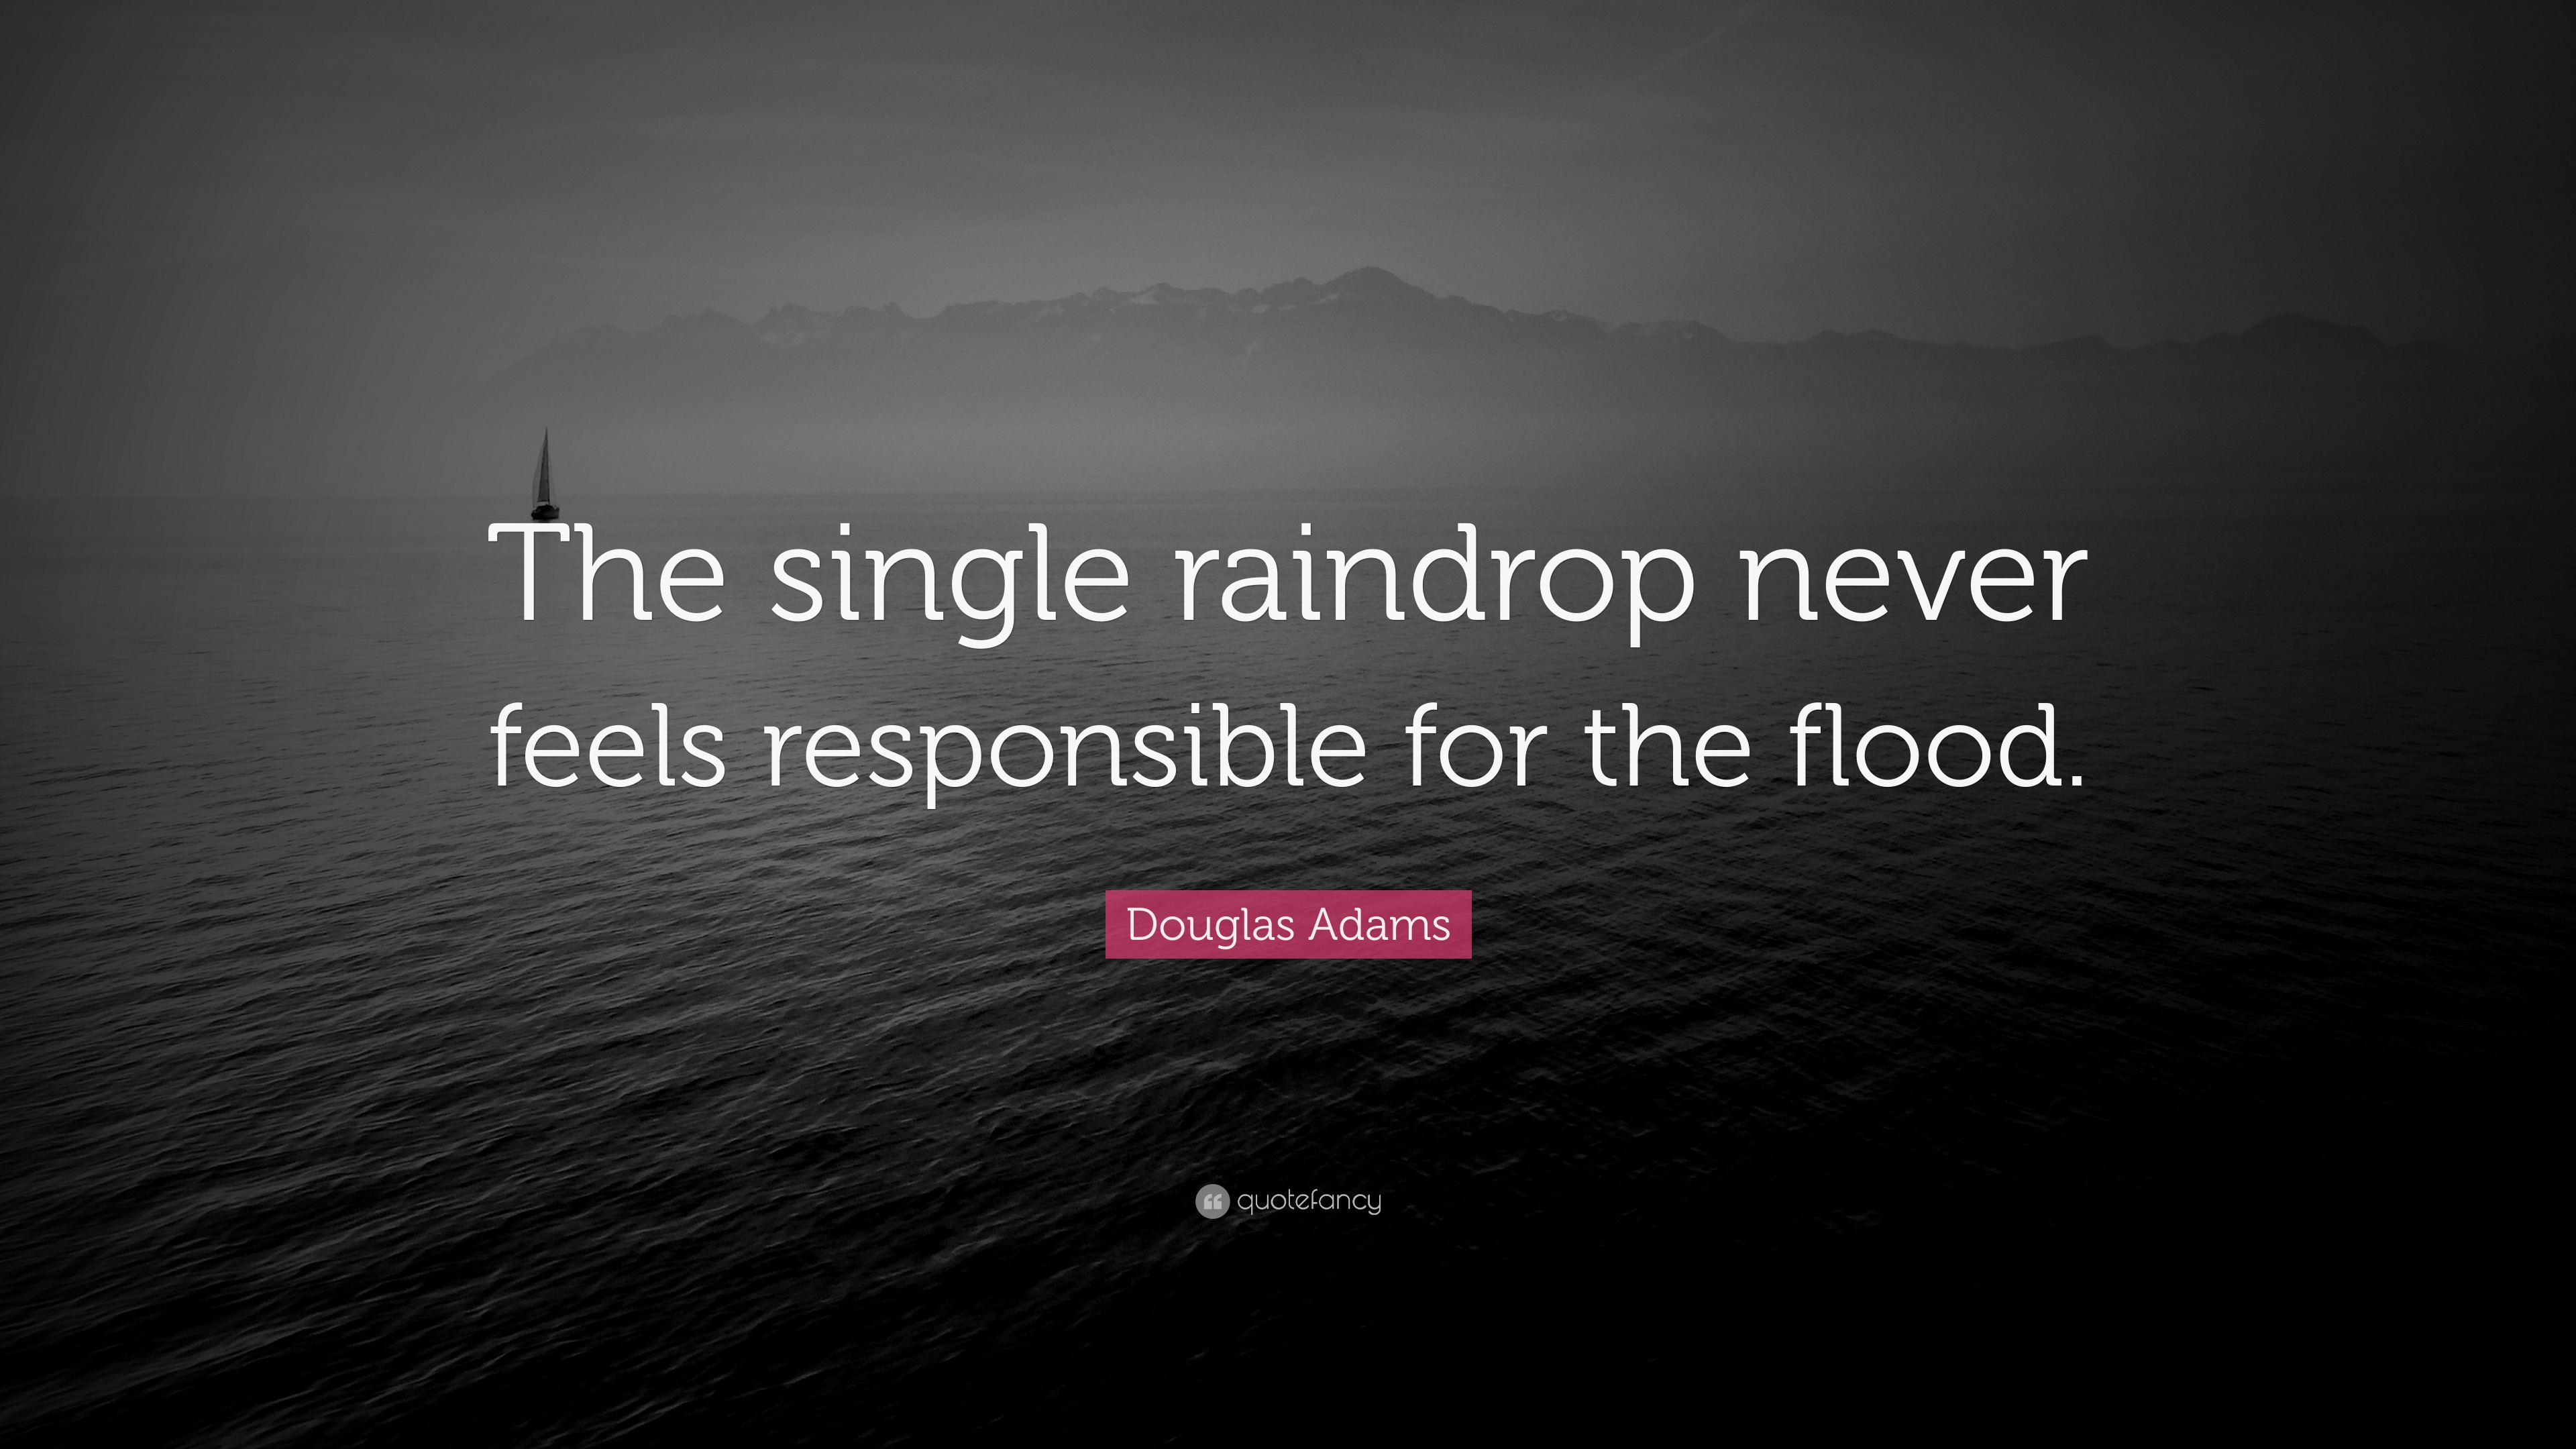 No single raindrop believes it is responsible for the flood meaning